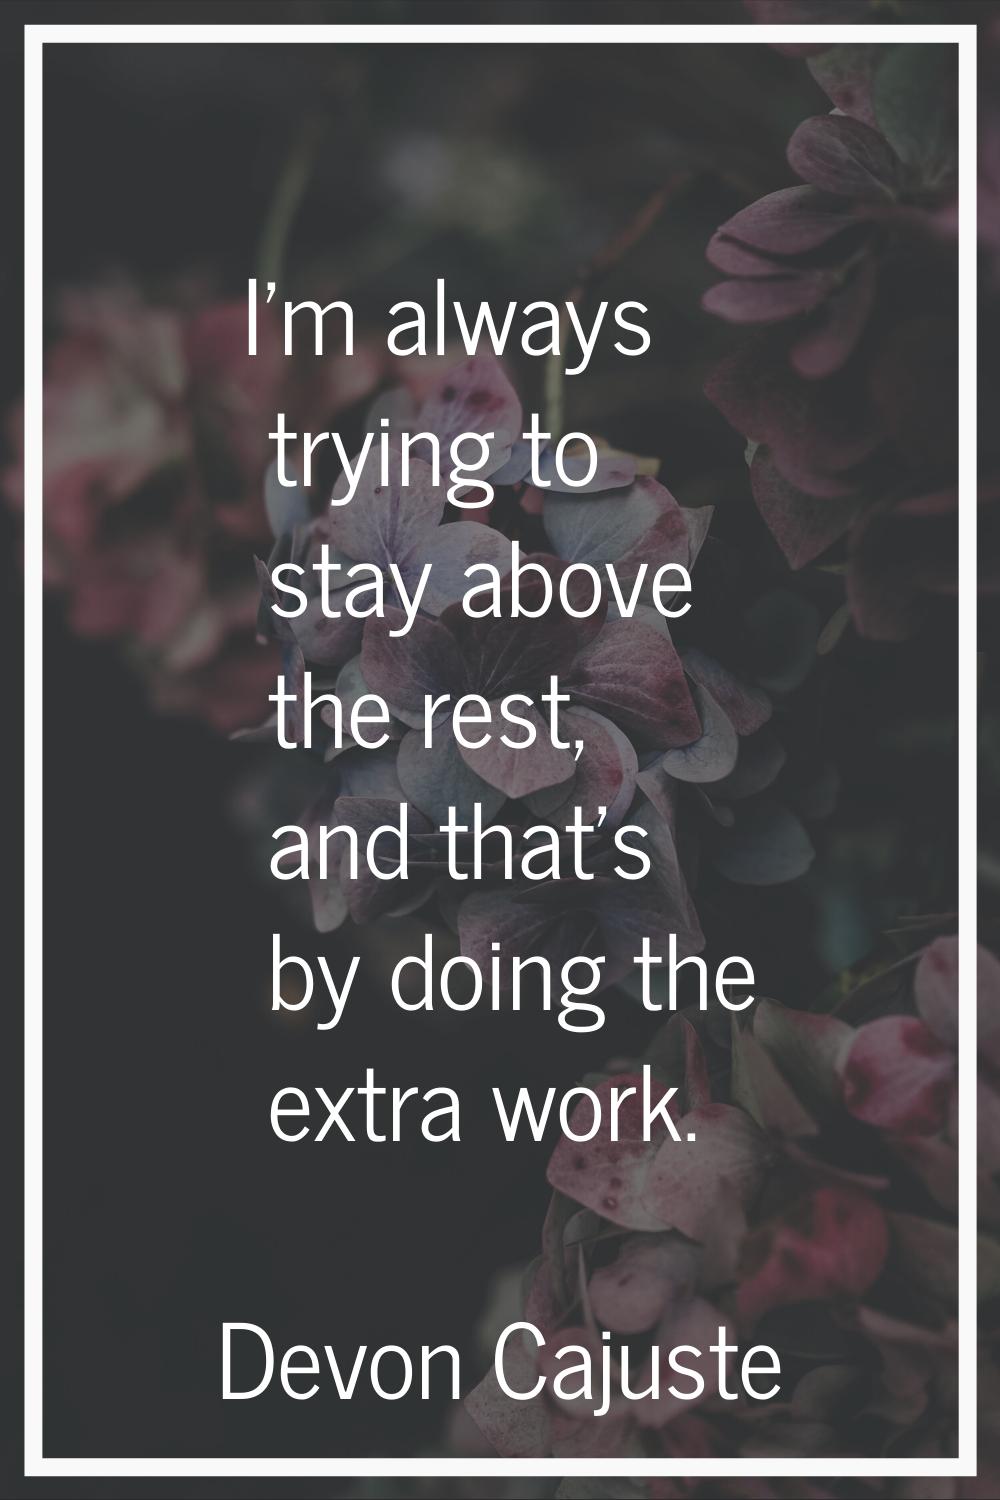 I'm always trying to stay above the rest, and that's by doing the extra work.